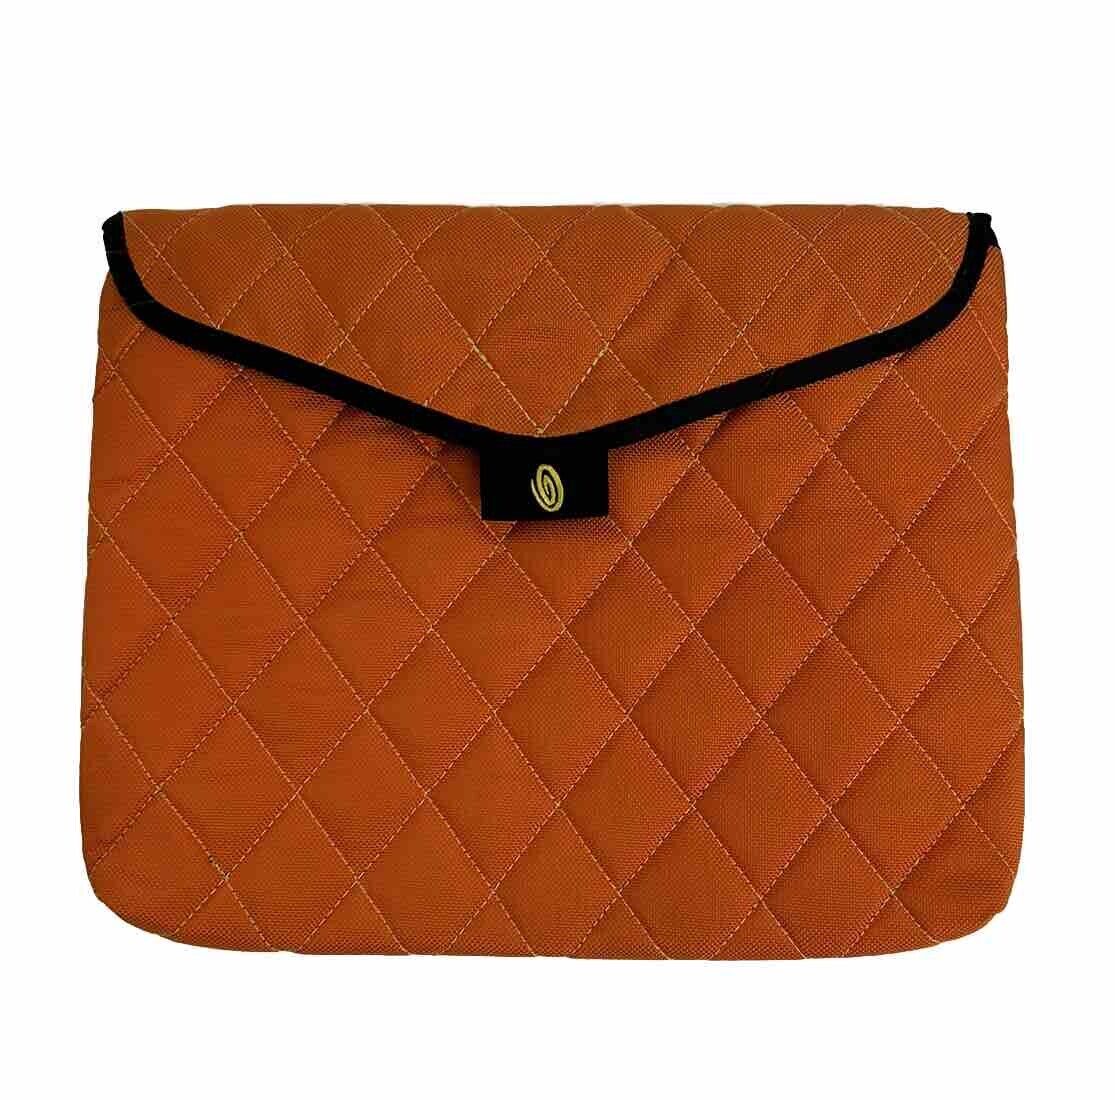 Timbuk2 Quilted LAPTOP SLEEVE Orange Computer Case Padded 15 X 12 “